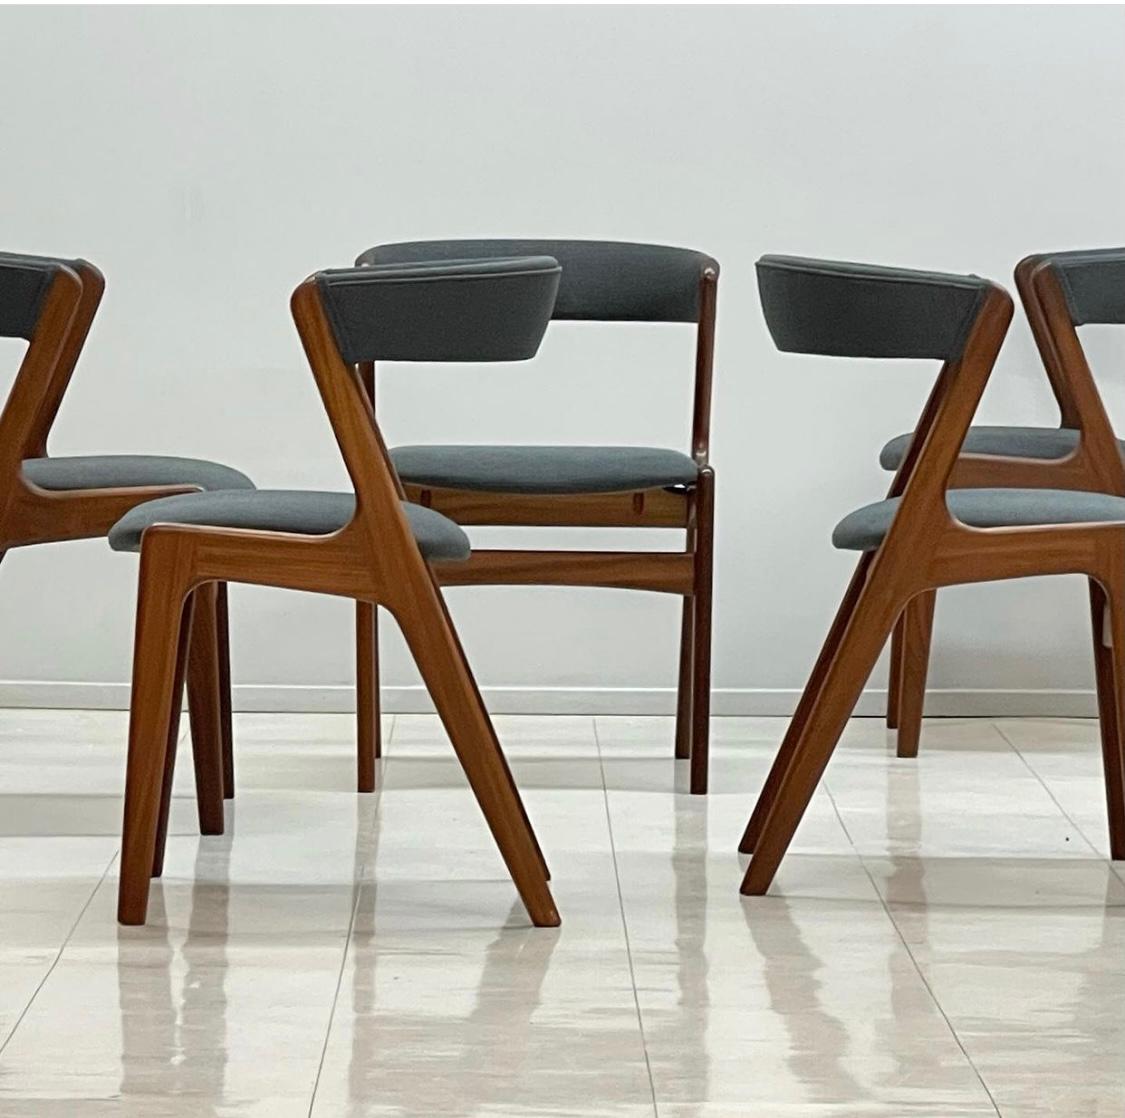 Stunning set of 6 dining chairs designed by Kai Kristiansen,, Made in Denmark, beautifully restored,, Superior quaiity and construction ,,Extremely comfortable,, Hand delivery avail to New York City or anywhere en route from Buffalo NY.